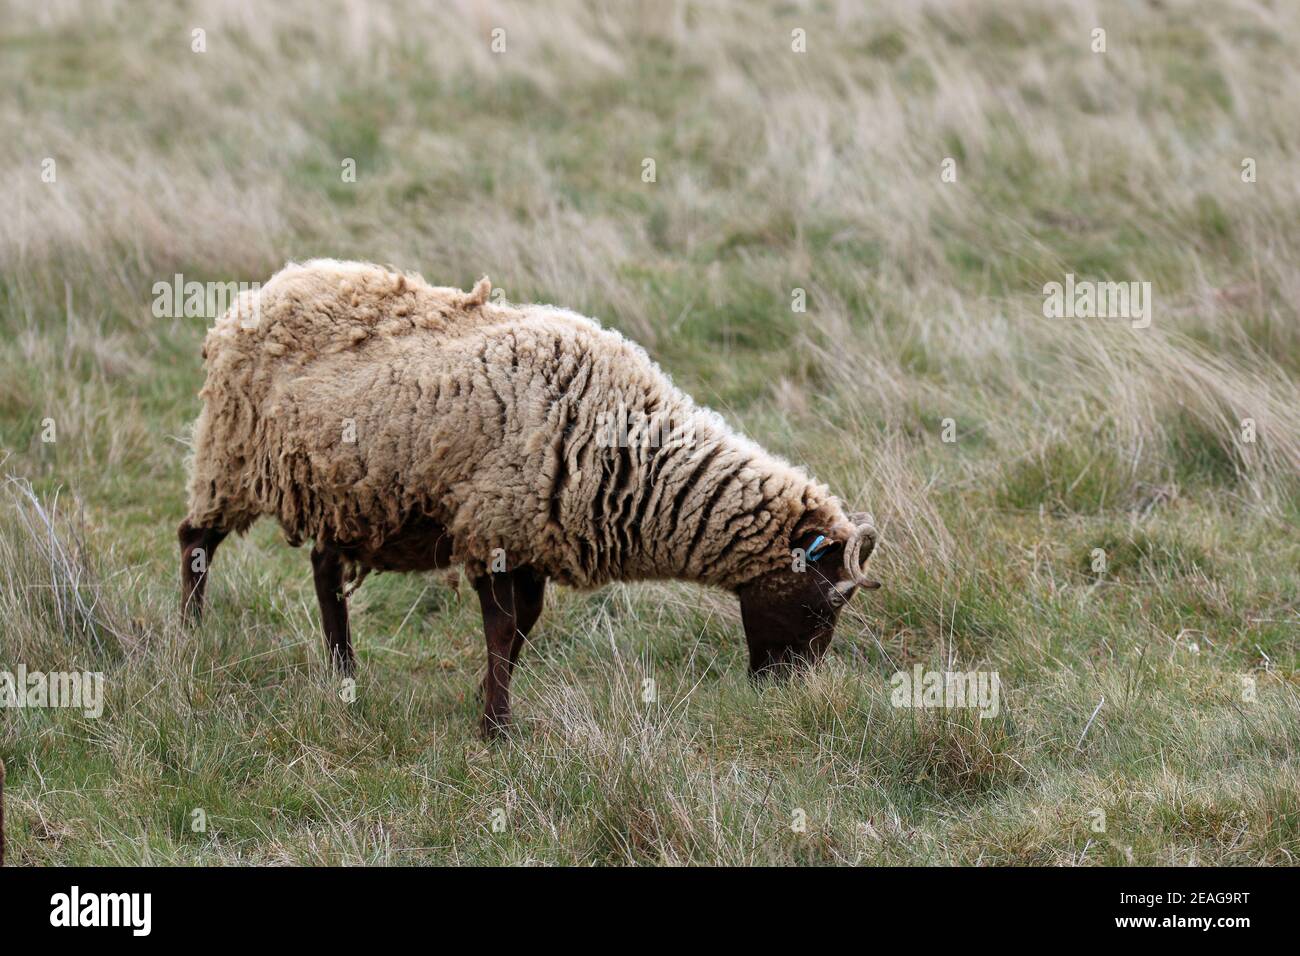 Manx Loaghtan ewe rare breed sheep with a dark brown head and legs, lighter brown coat and curled horns grazing on a rough grass meadow. Stock Photo